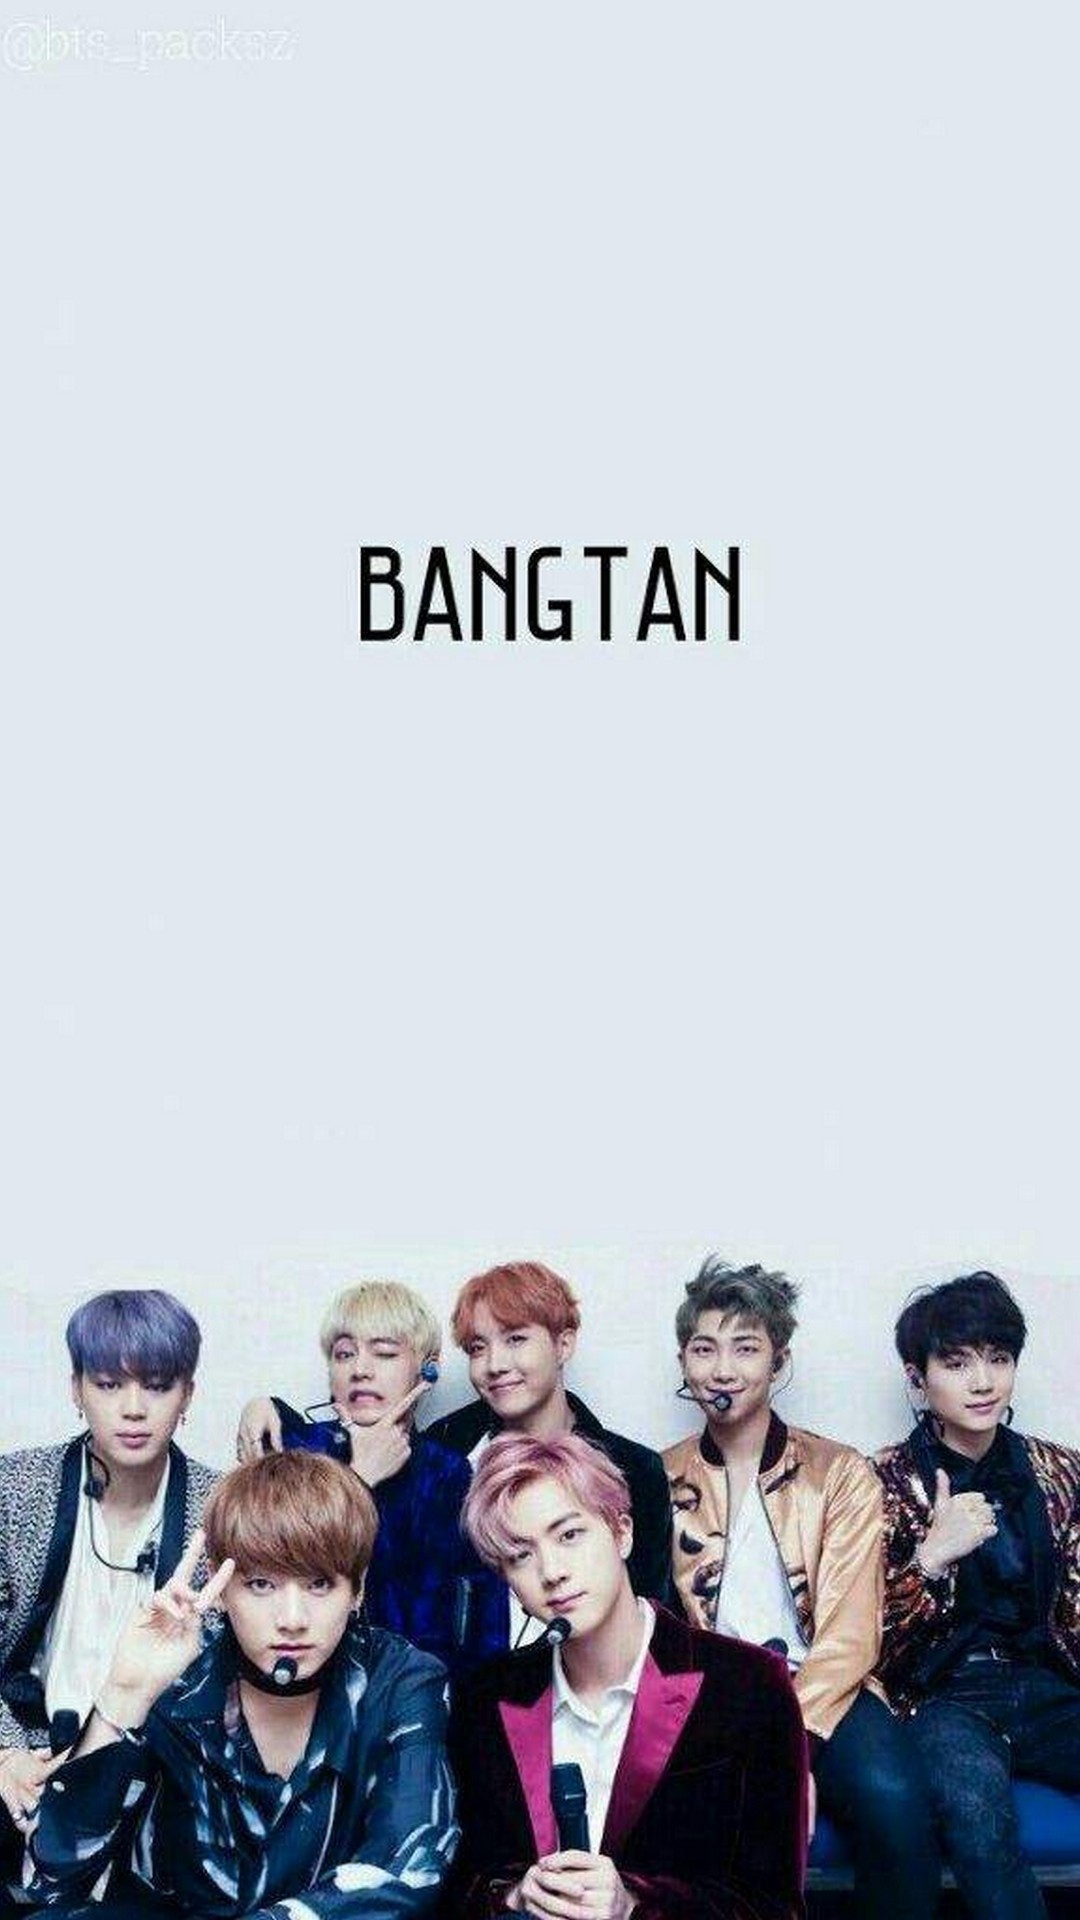 BTS iPhone Wallpaper HD with high-resolution 1080x1920 pixel. You can use this wallpaper for your Desktop Computer Backgrounds, Mac Wallpapers, Android Lock screen or iPhone Screensavers and another smartphone device